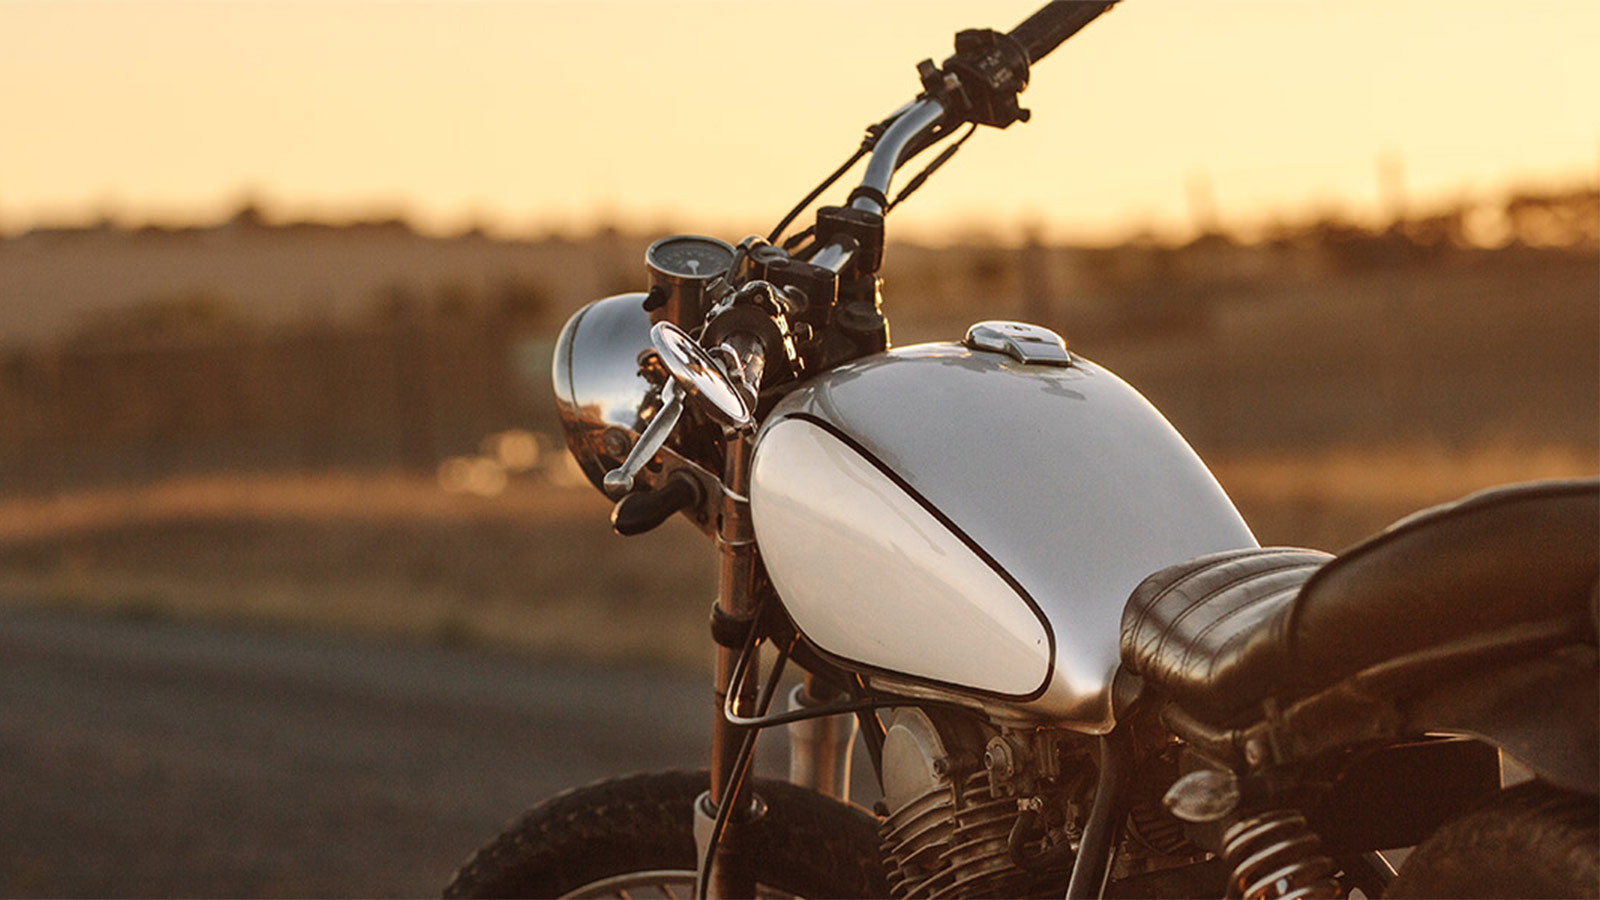 Vintage black and silver motorcycle parked in front of a picturesque sunset.